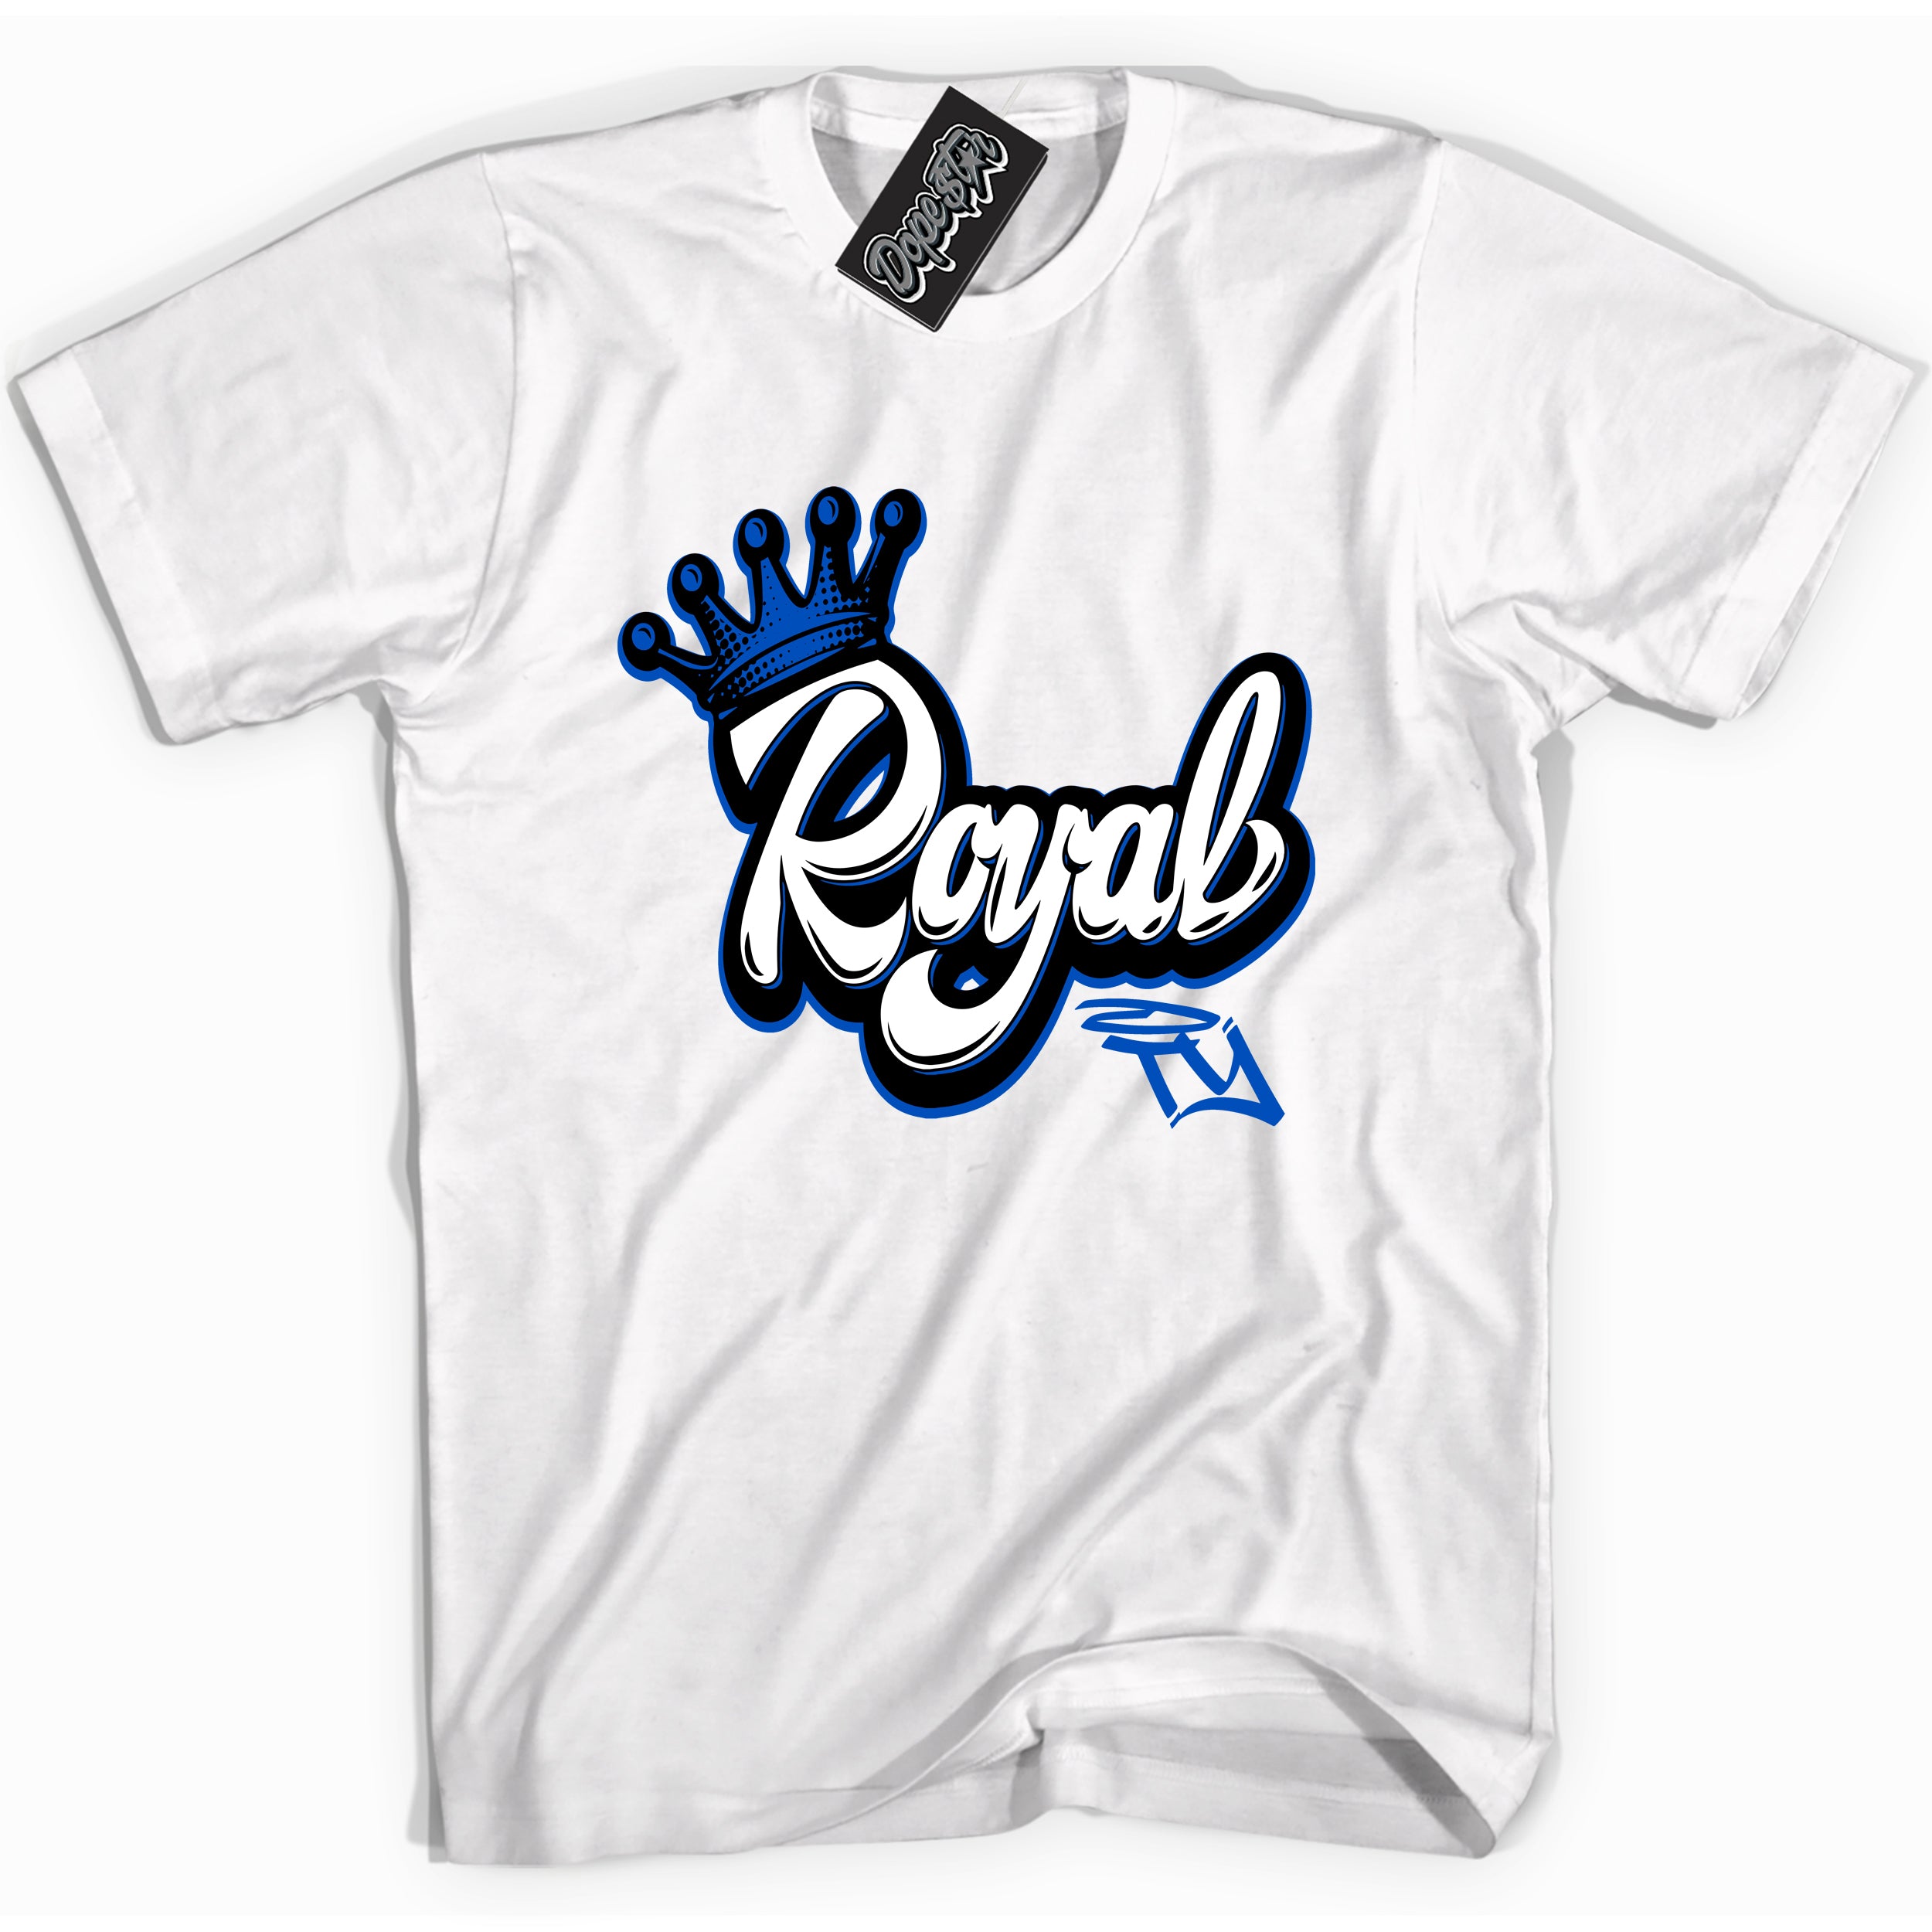 Cool White graphic tee with "Royal" design, that perfectly matches Royal Reimagined 1s sneakers 